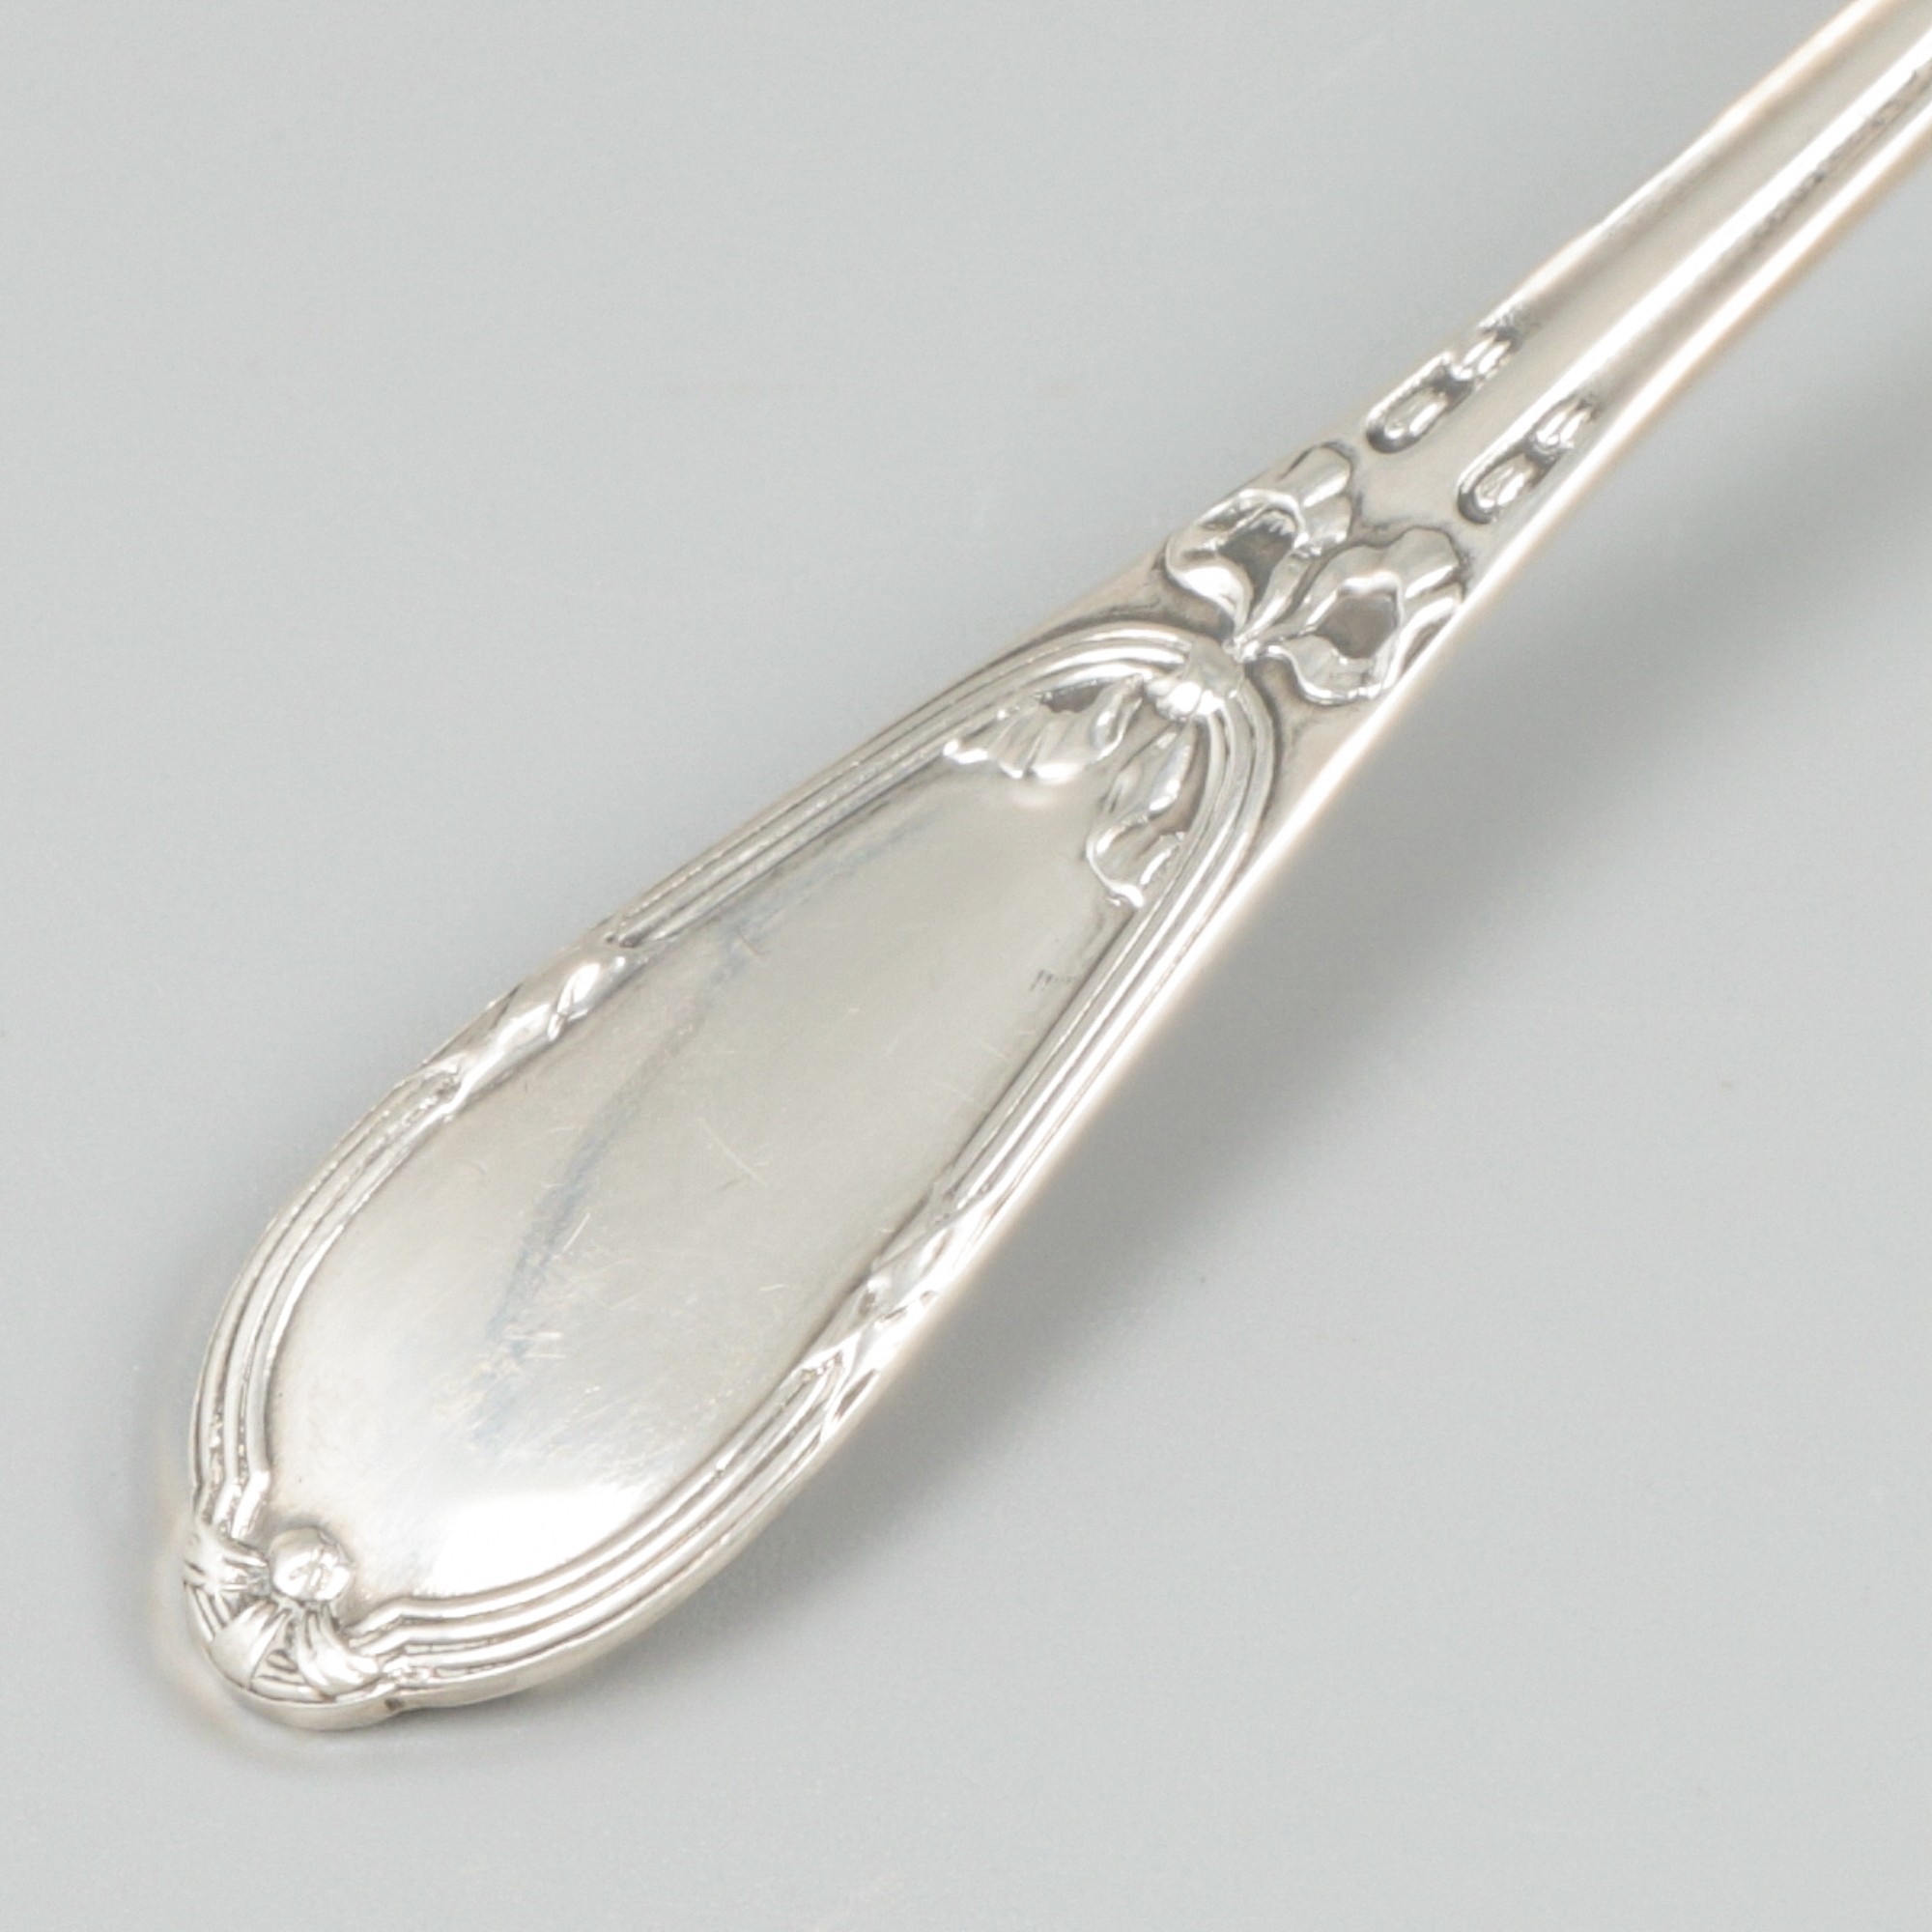 Tea strainer silver. - Image 5 of 6